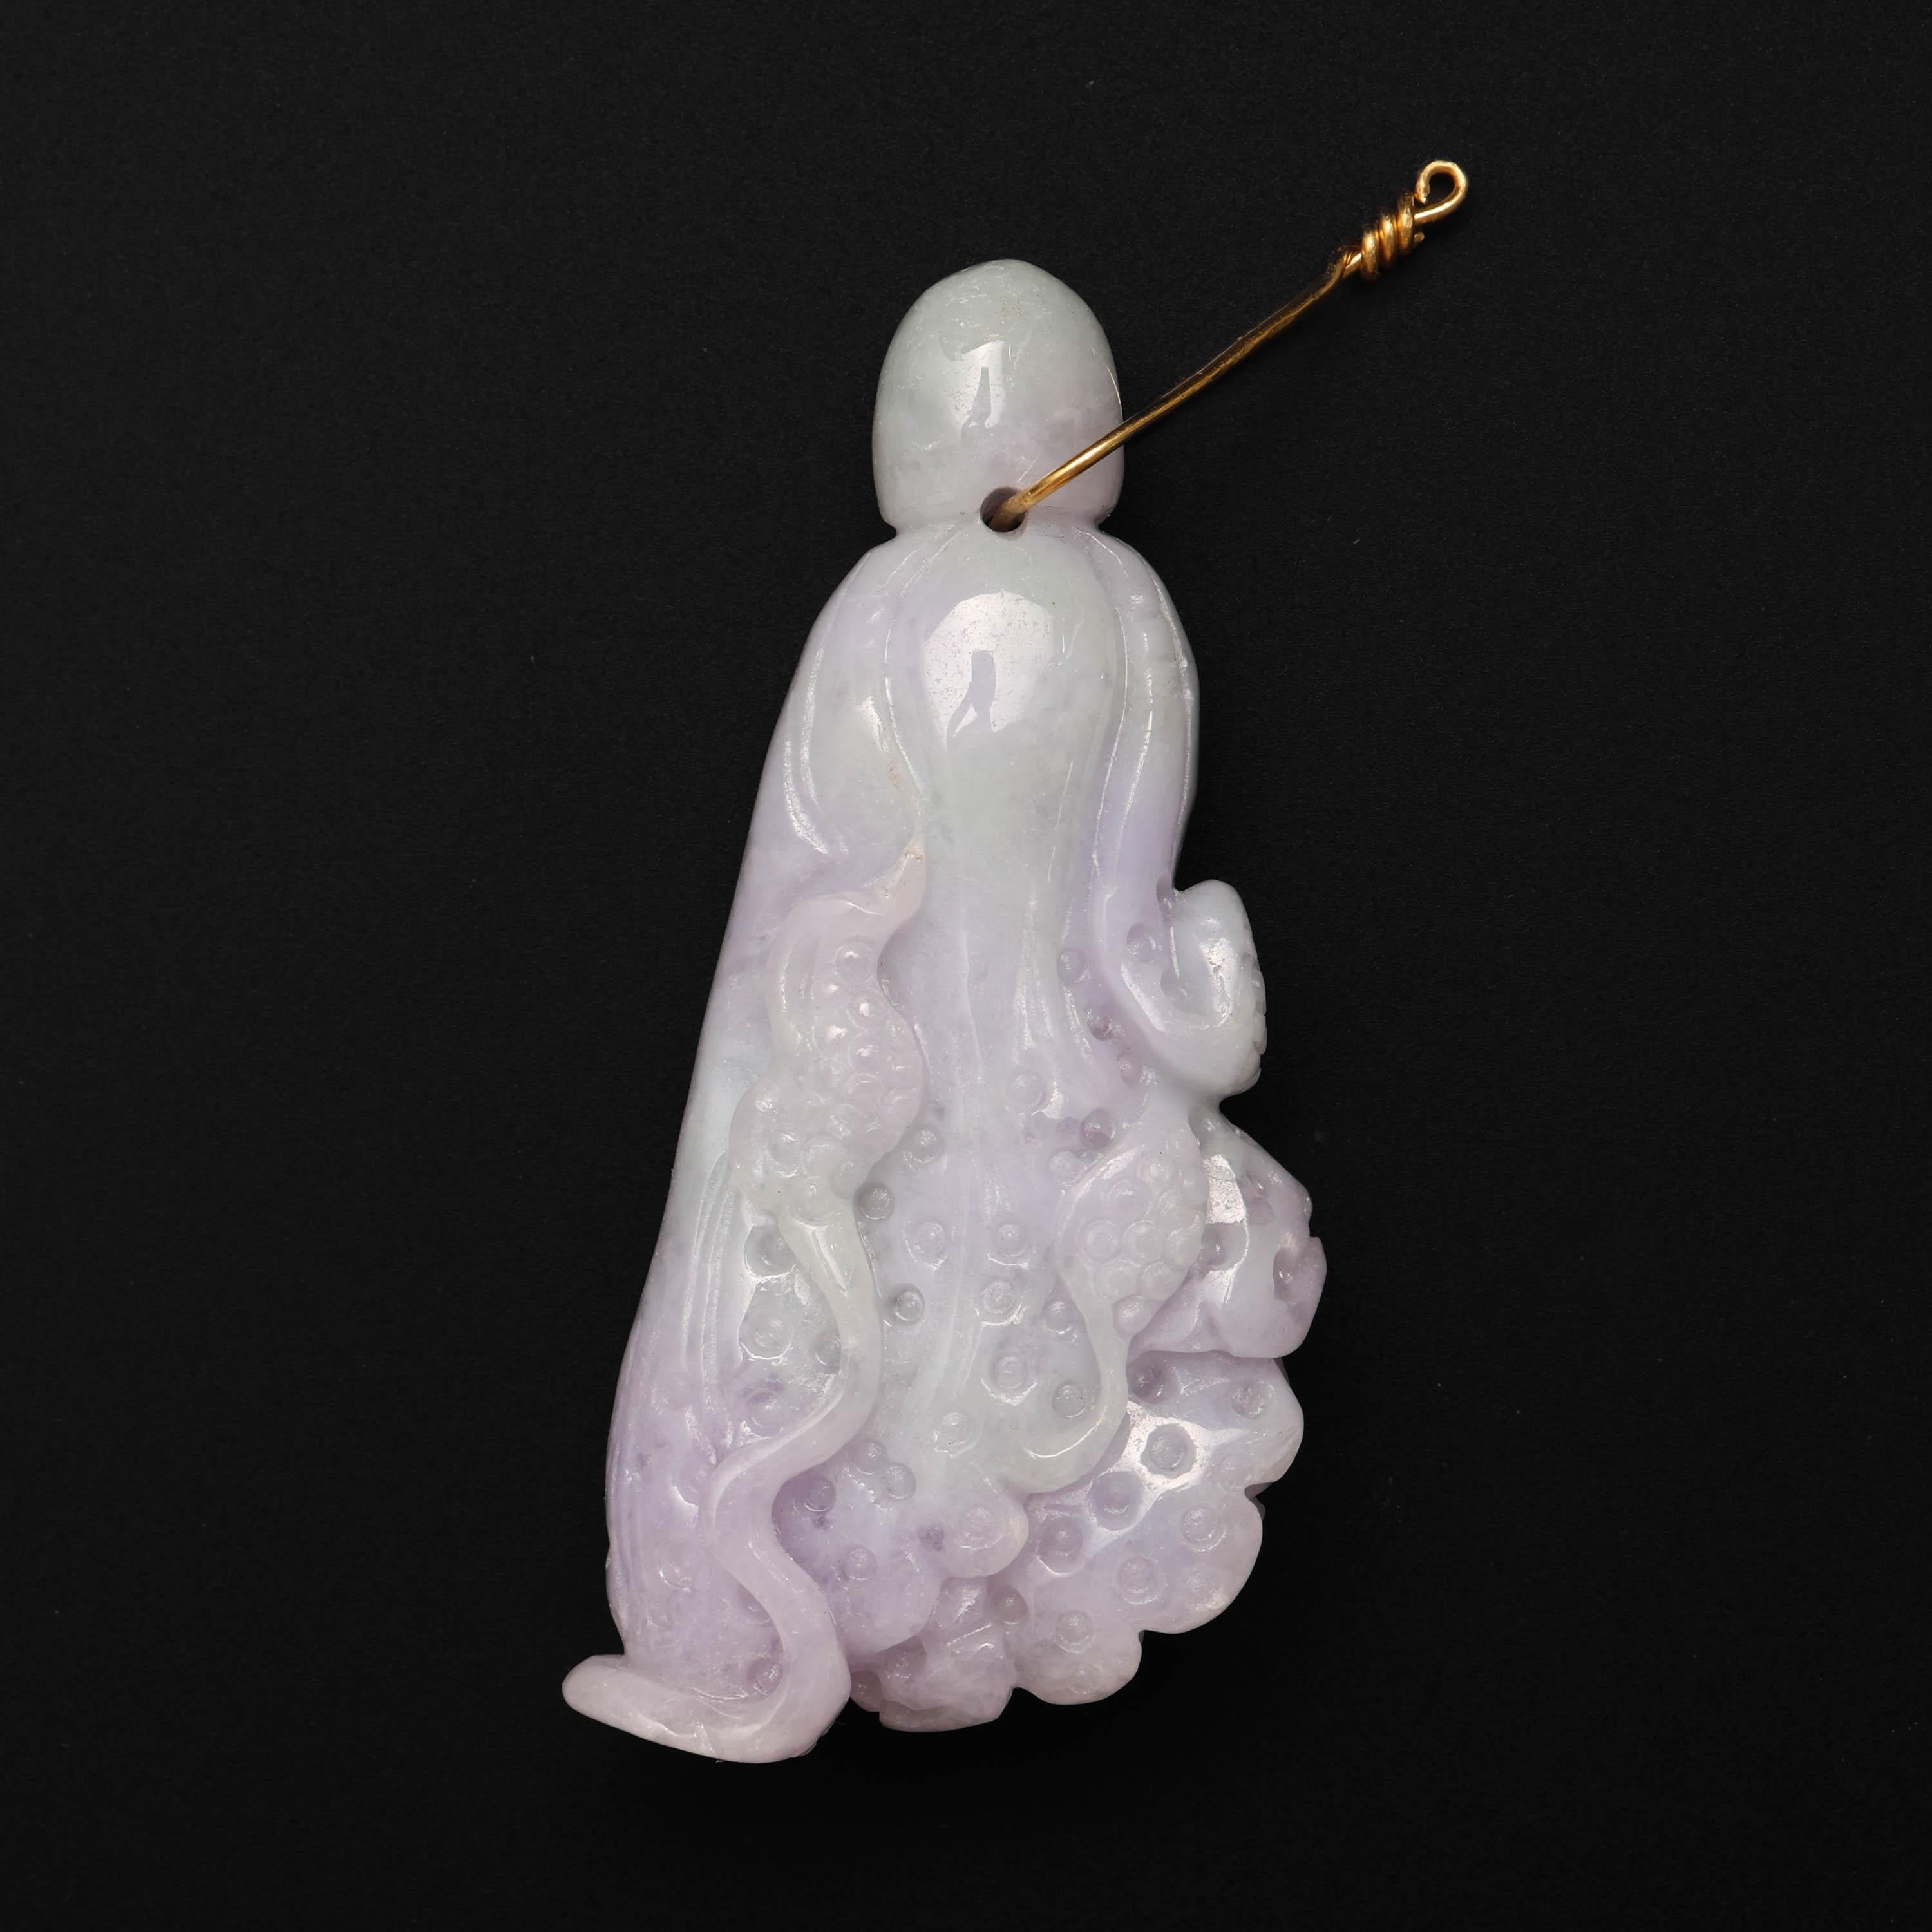 Intricately carved by a master lapidary artist, this natural and untreated Burmese jadeite jade carved pendant depicts a cabbage; long symbolic for purity.

This gorgeous carving was created from a single piece of natural and untreated Burmese